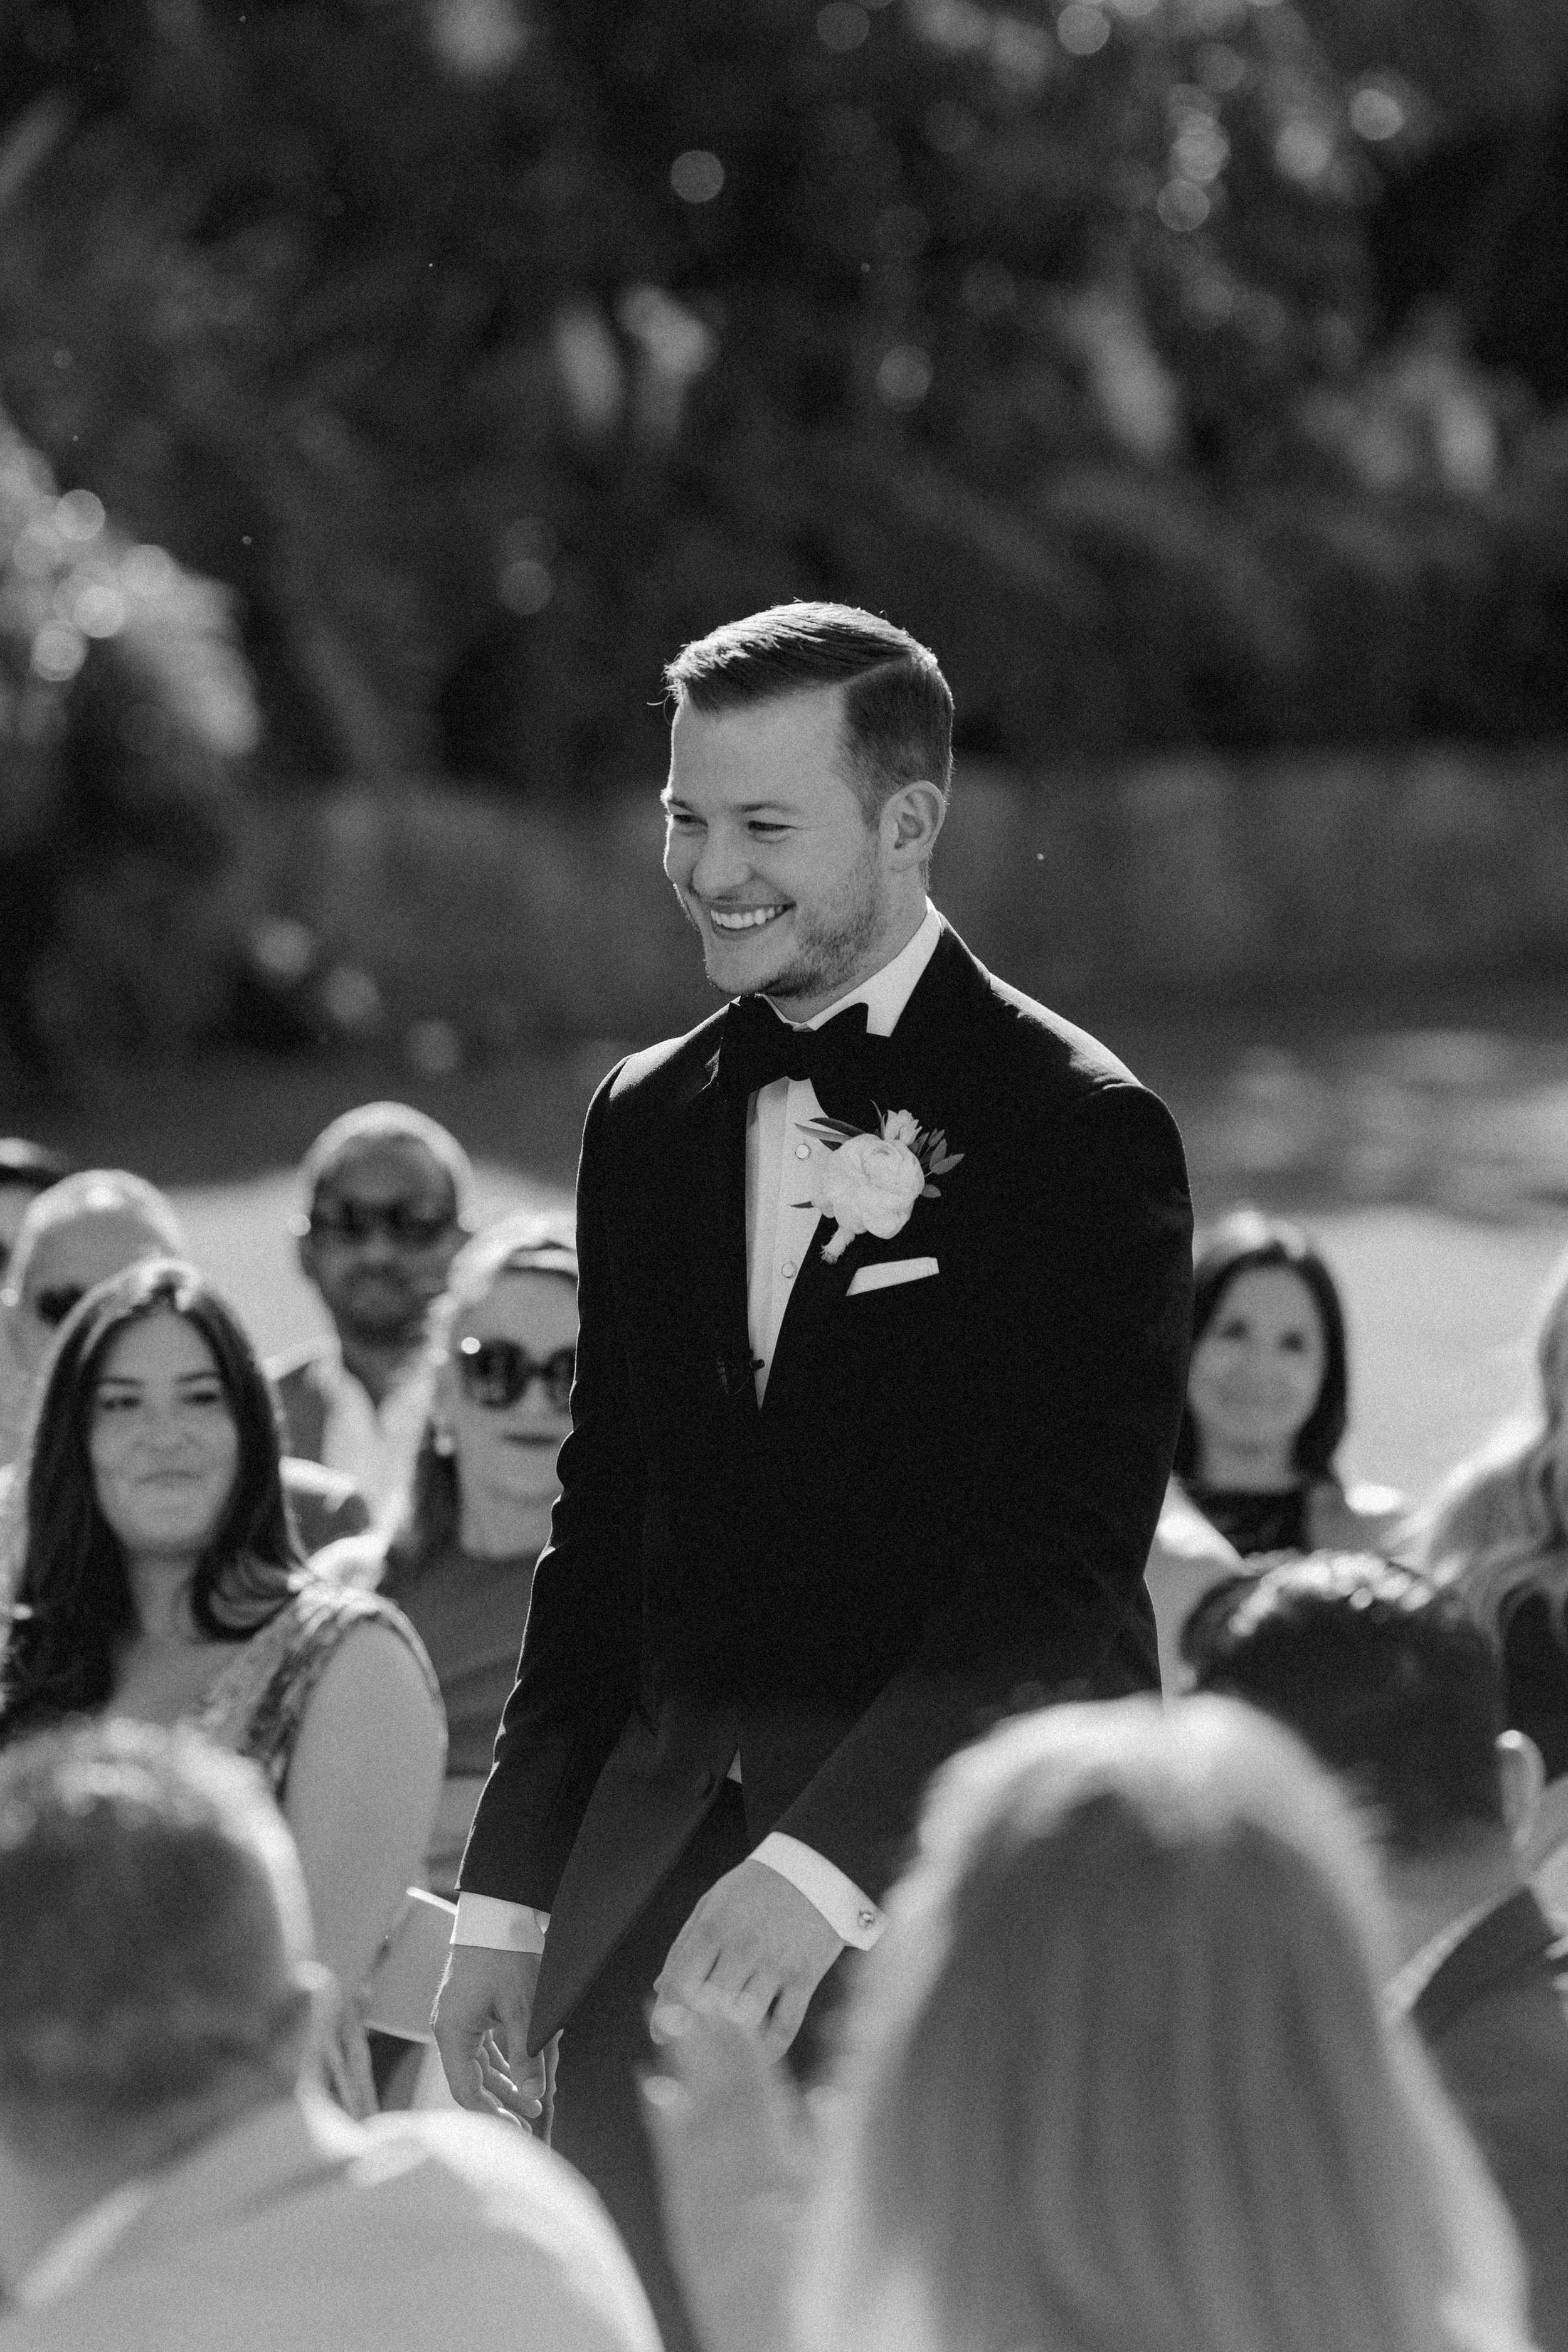 www.santabarbarawedding.com | KB Events | Ali Beck | Santa Barbara Courthouse | Poppy Pod Floral Design | The Black Tux | Just 4 Fun Party Rentals | The Groom Walking Down the Aisle